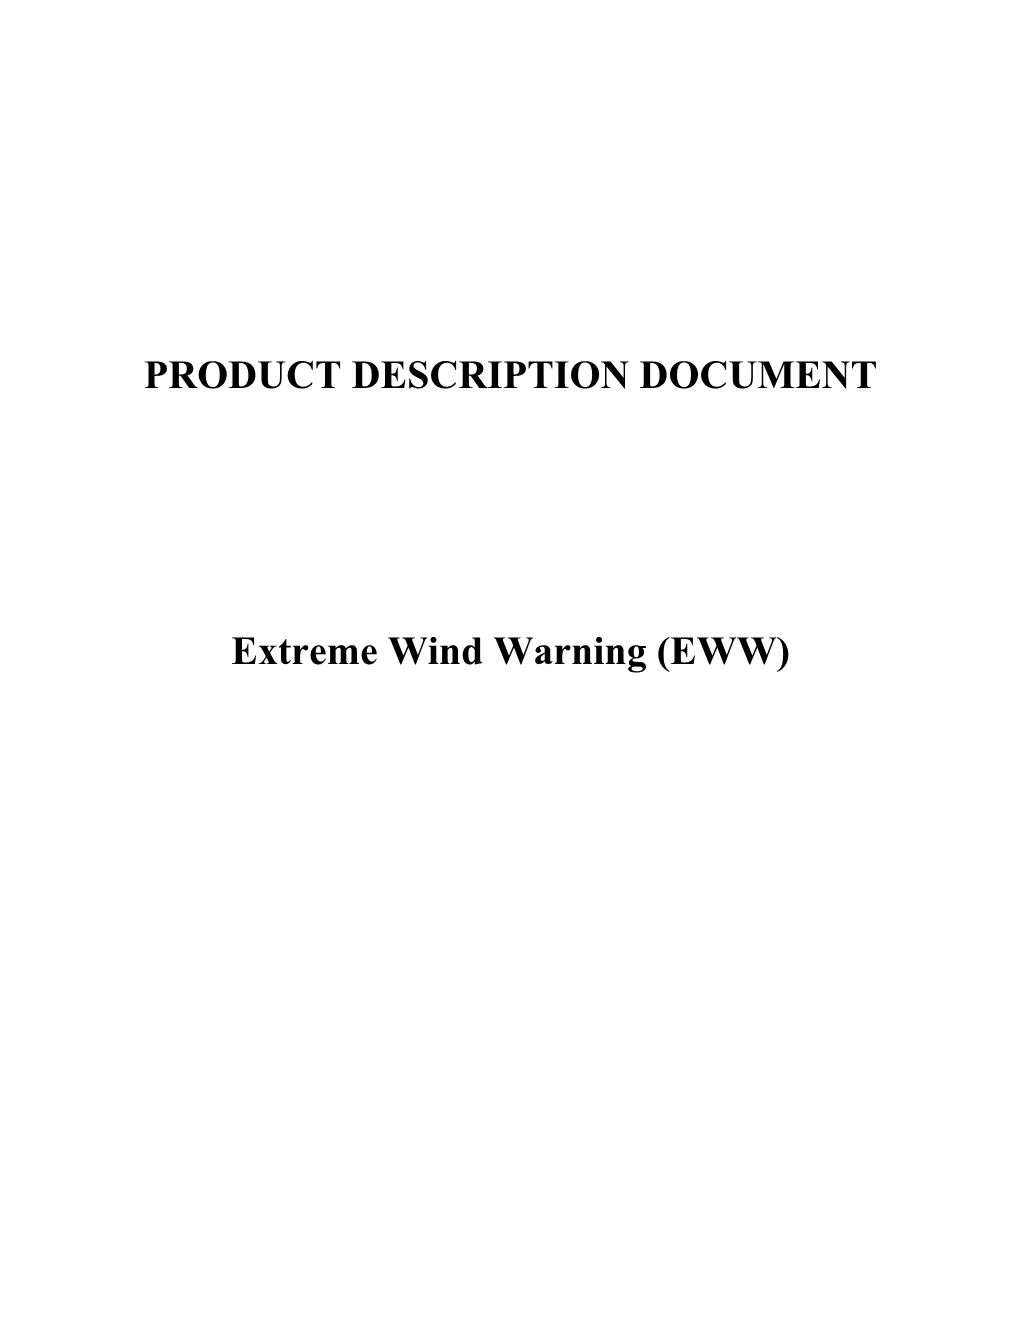 PRODUCT DESCRIPTION DOCUMENT Extreme Wind Warning